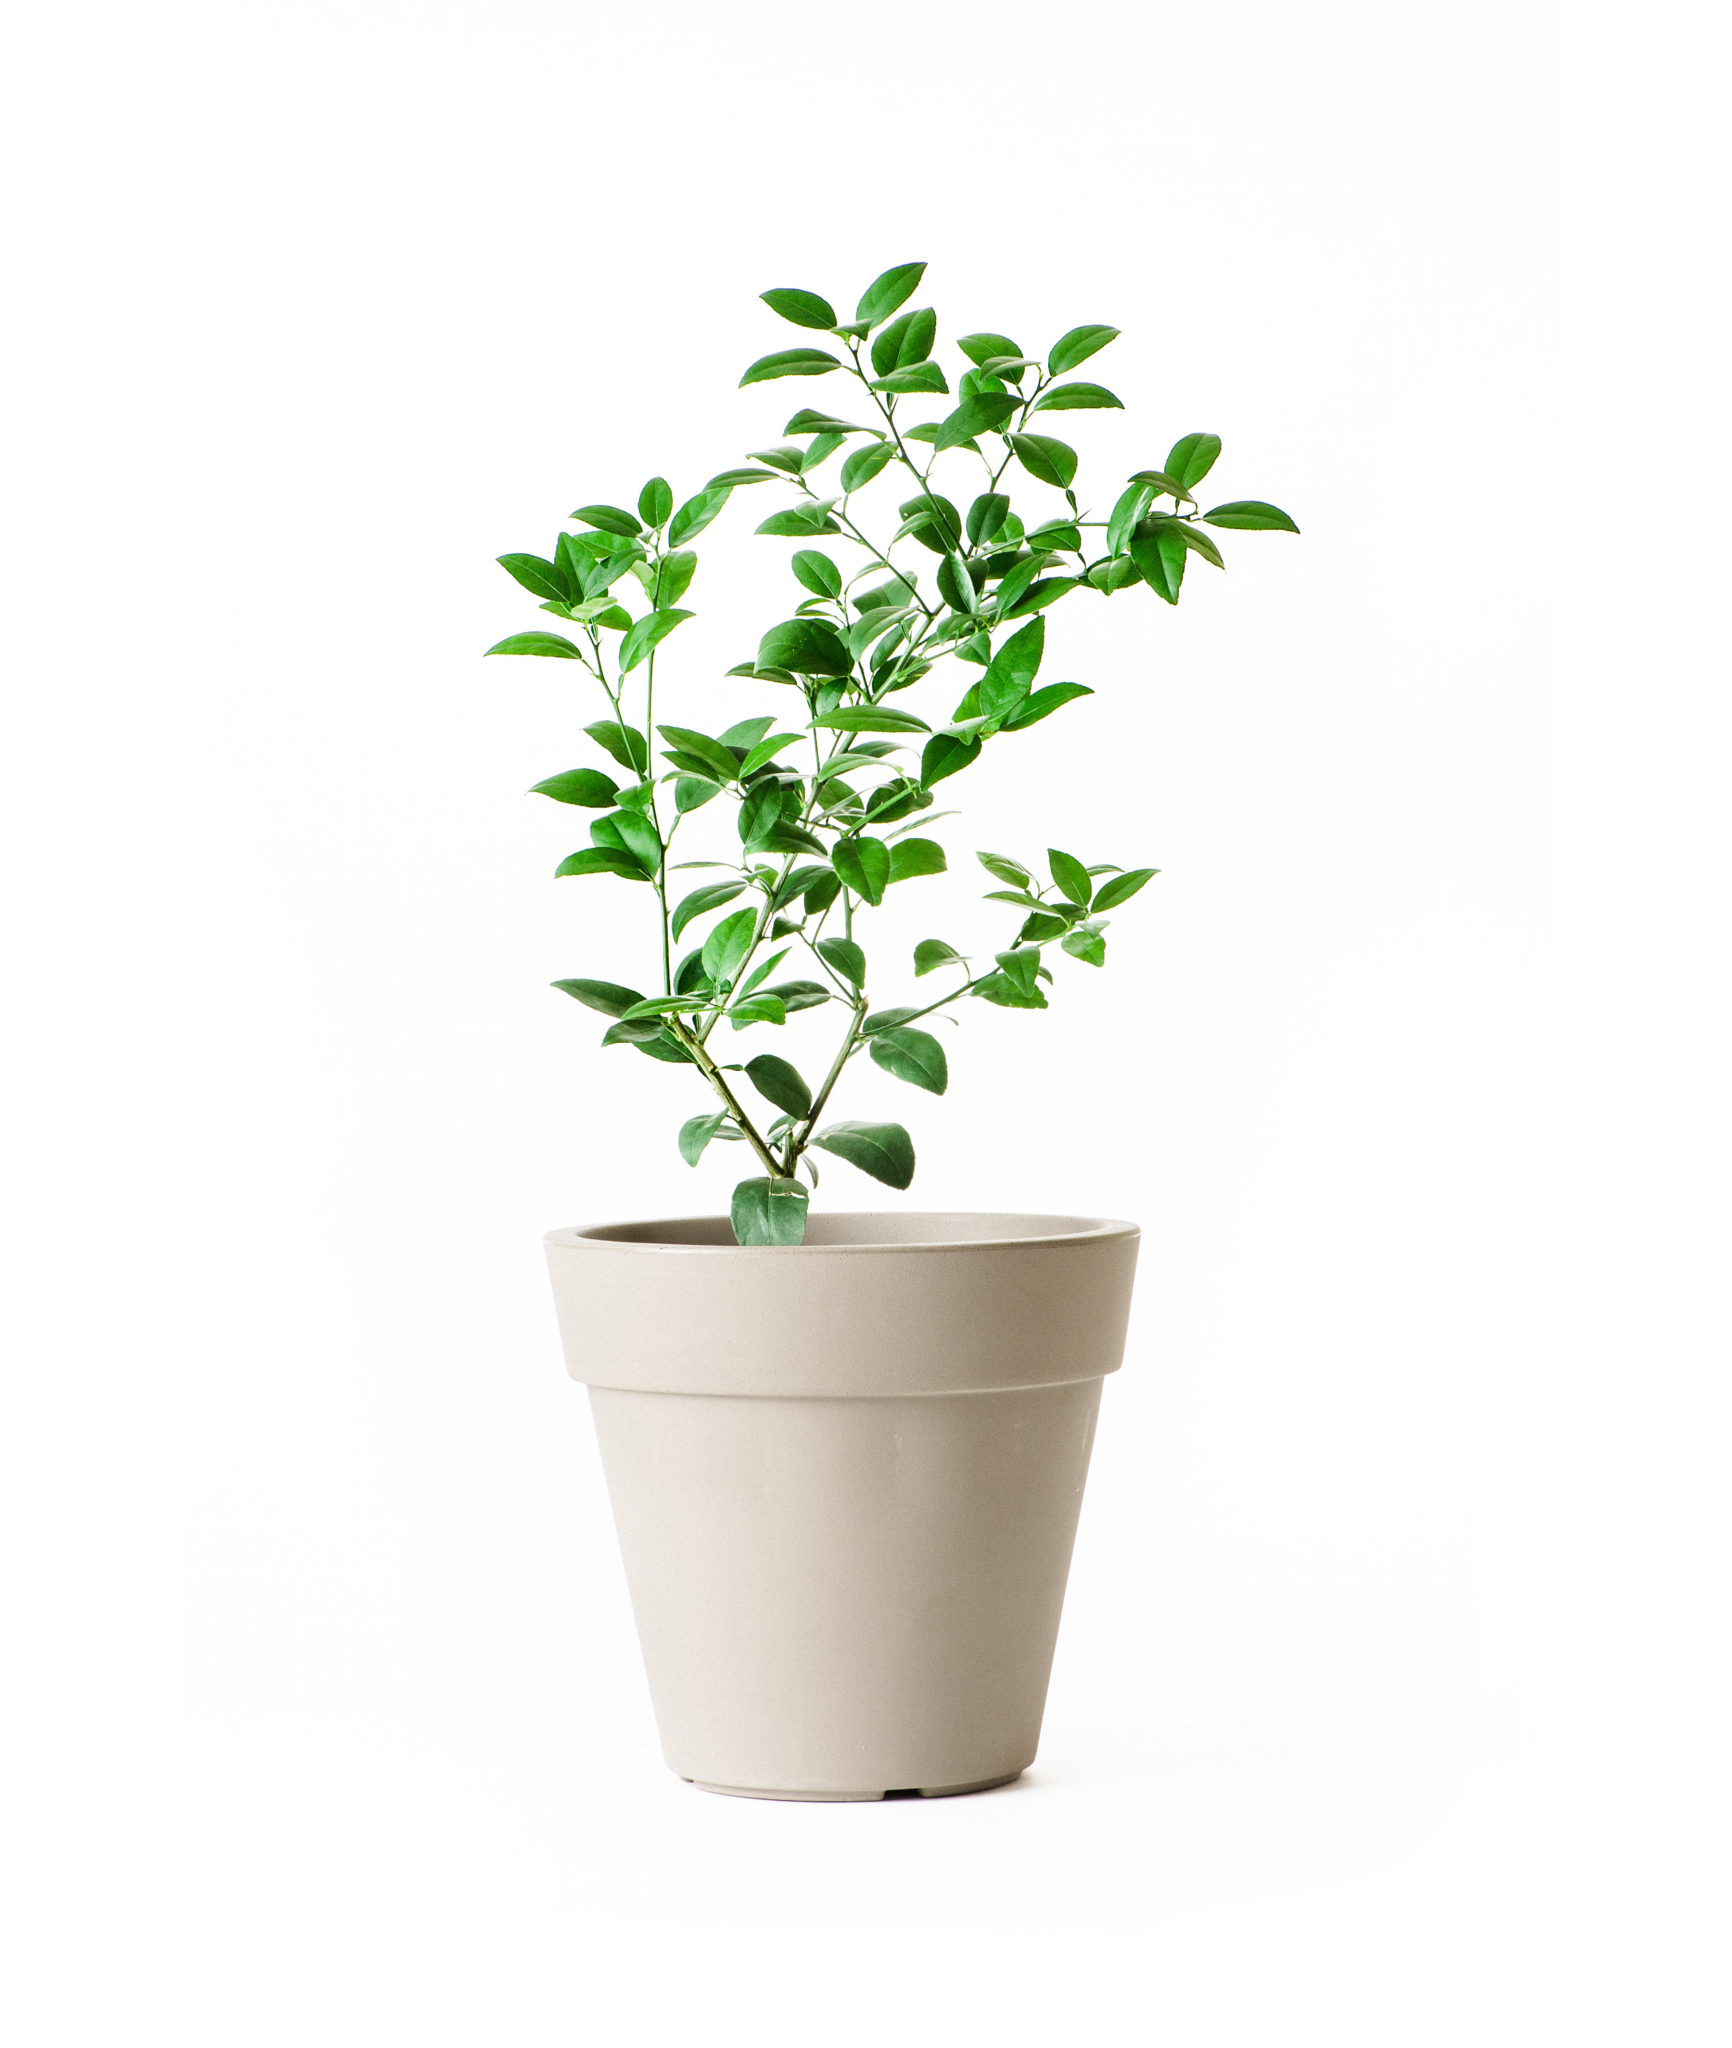 Image of Dwarf Key Lime Tree (Age: 2 - 3 Years Height: 2 - 3 FT)